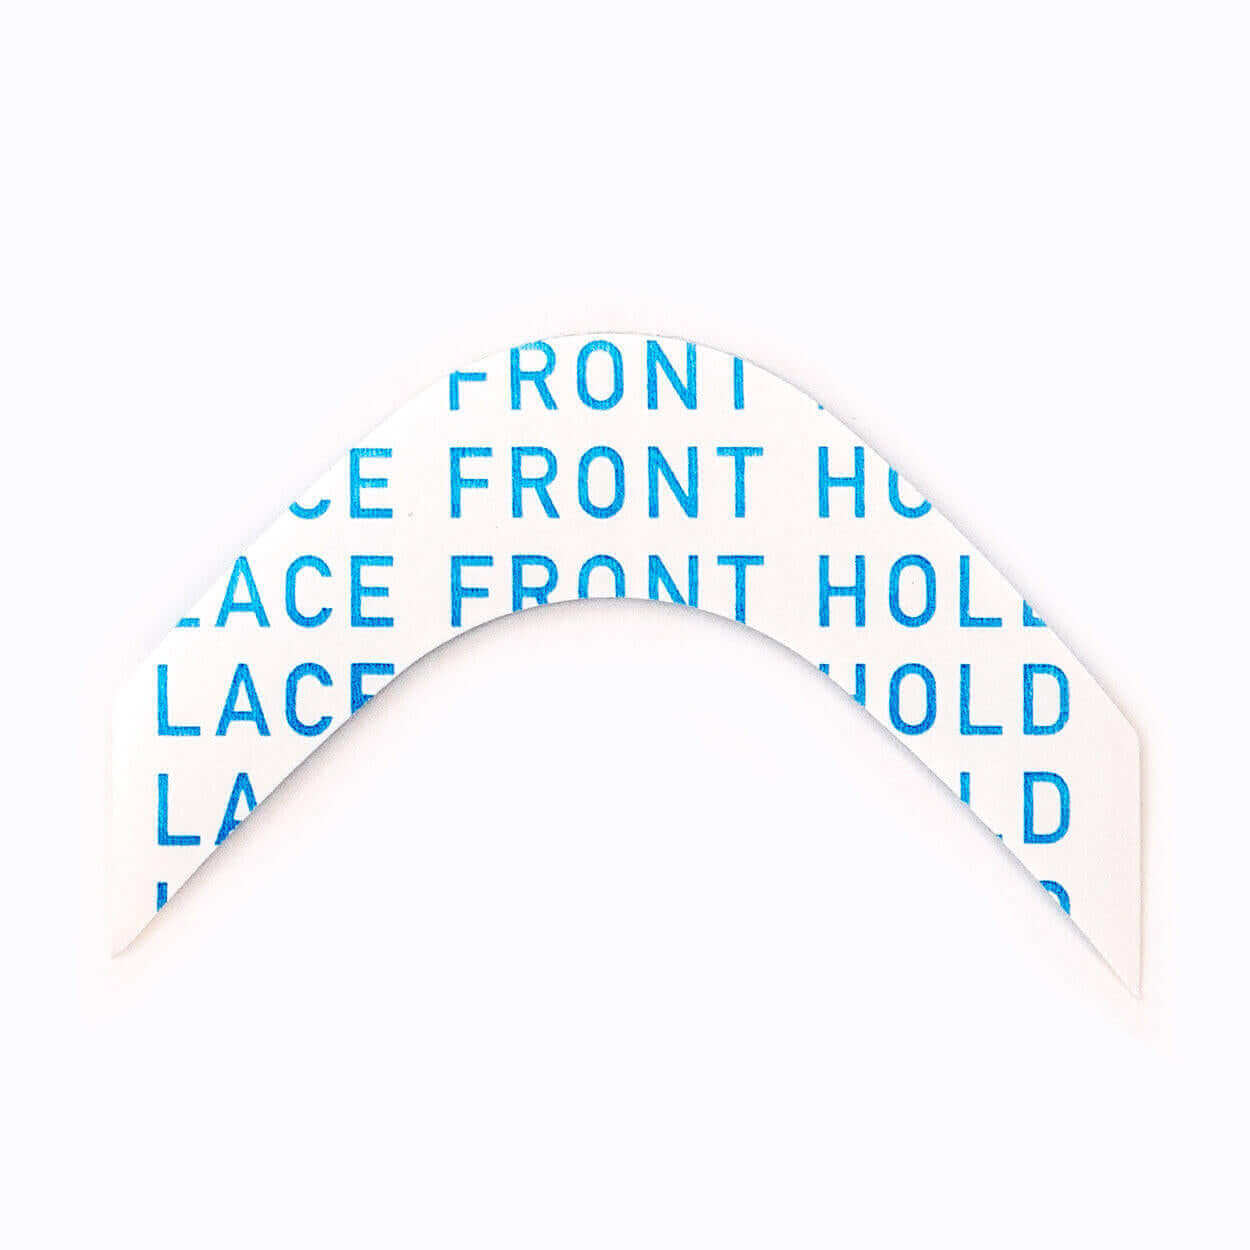 Lace Front Hold Contour Tape Strips - OneHead Hair Solutions